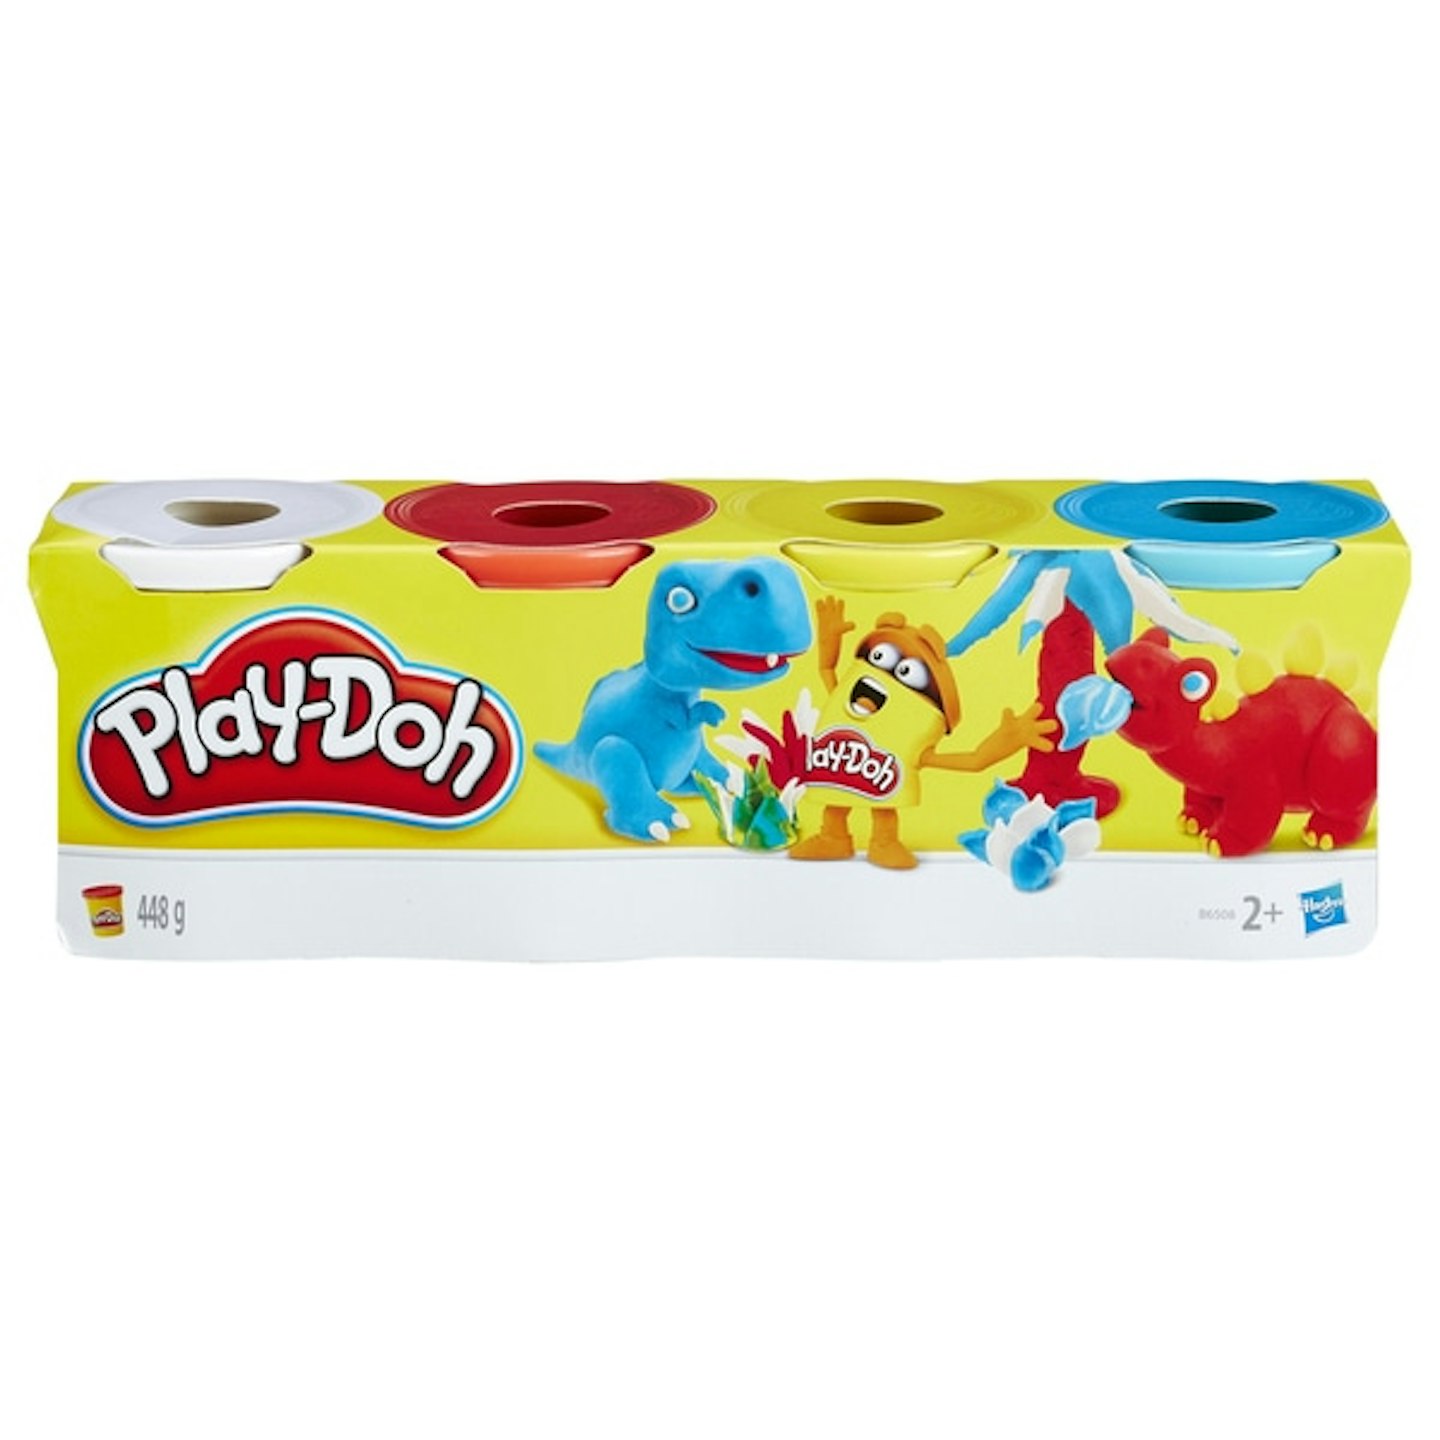 Play-Doh Classic Colours 4 Pack